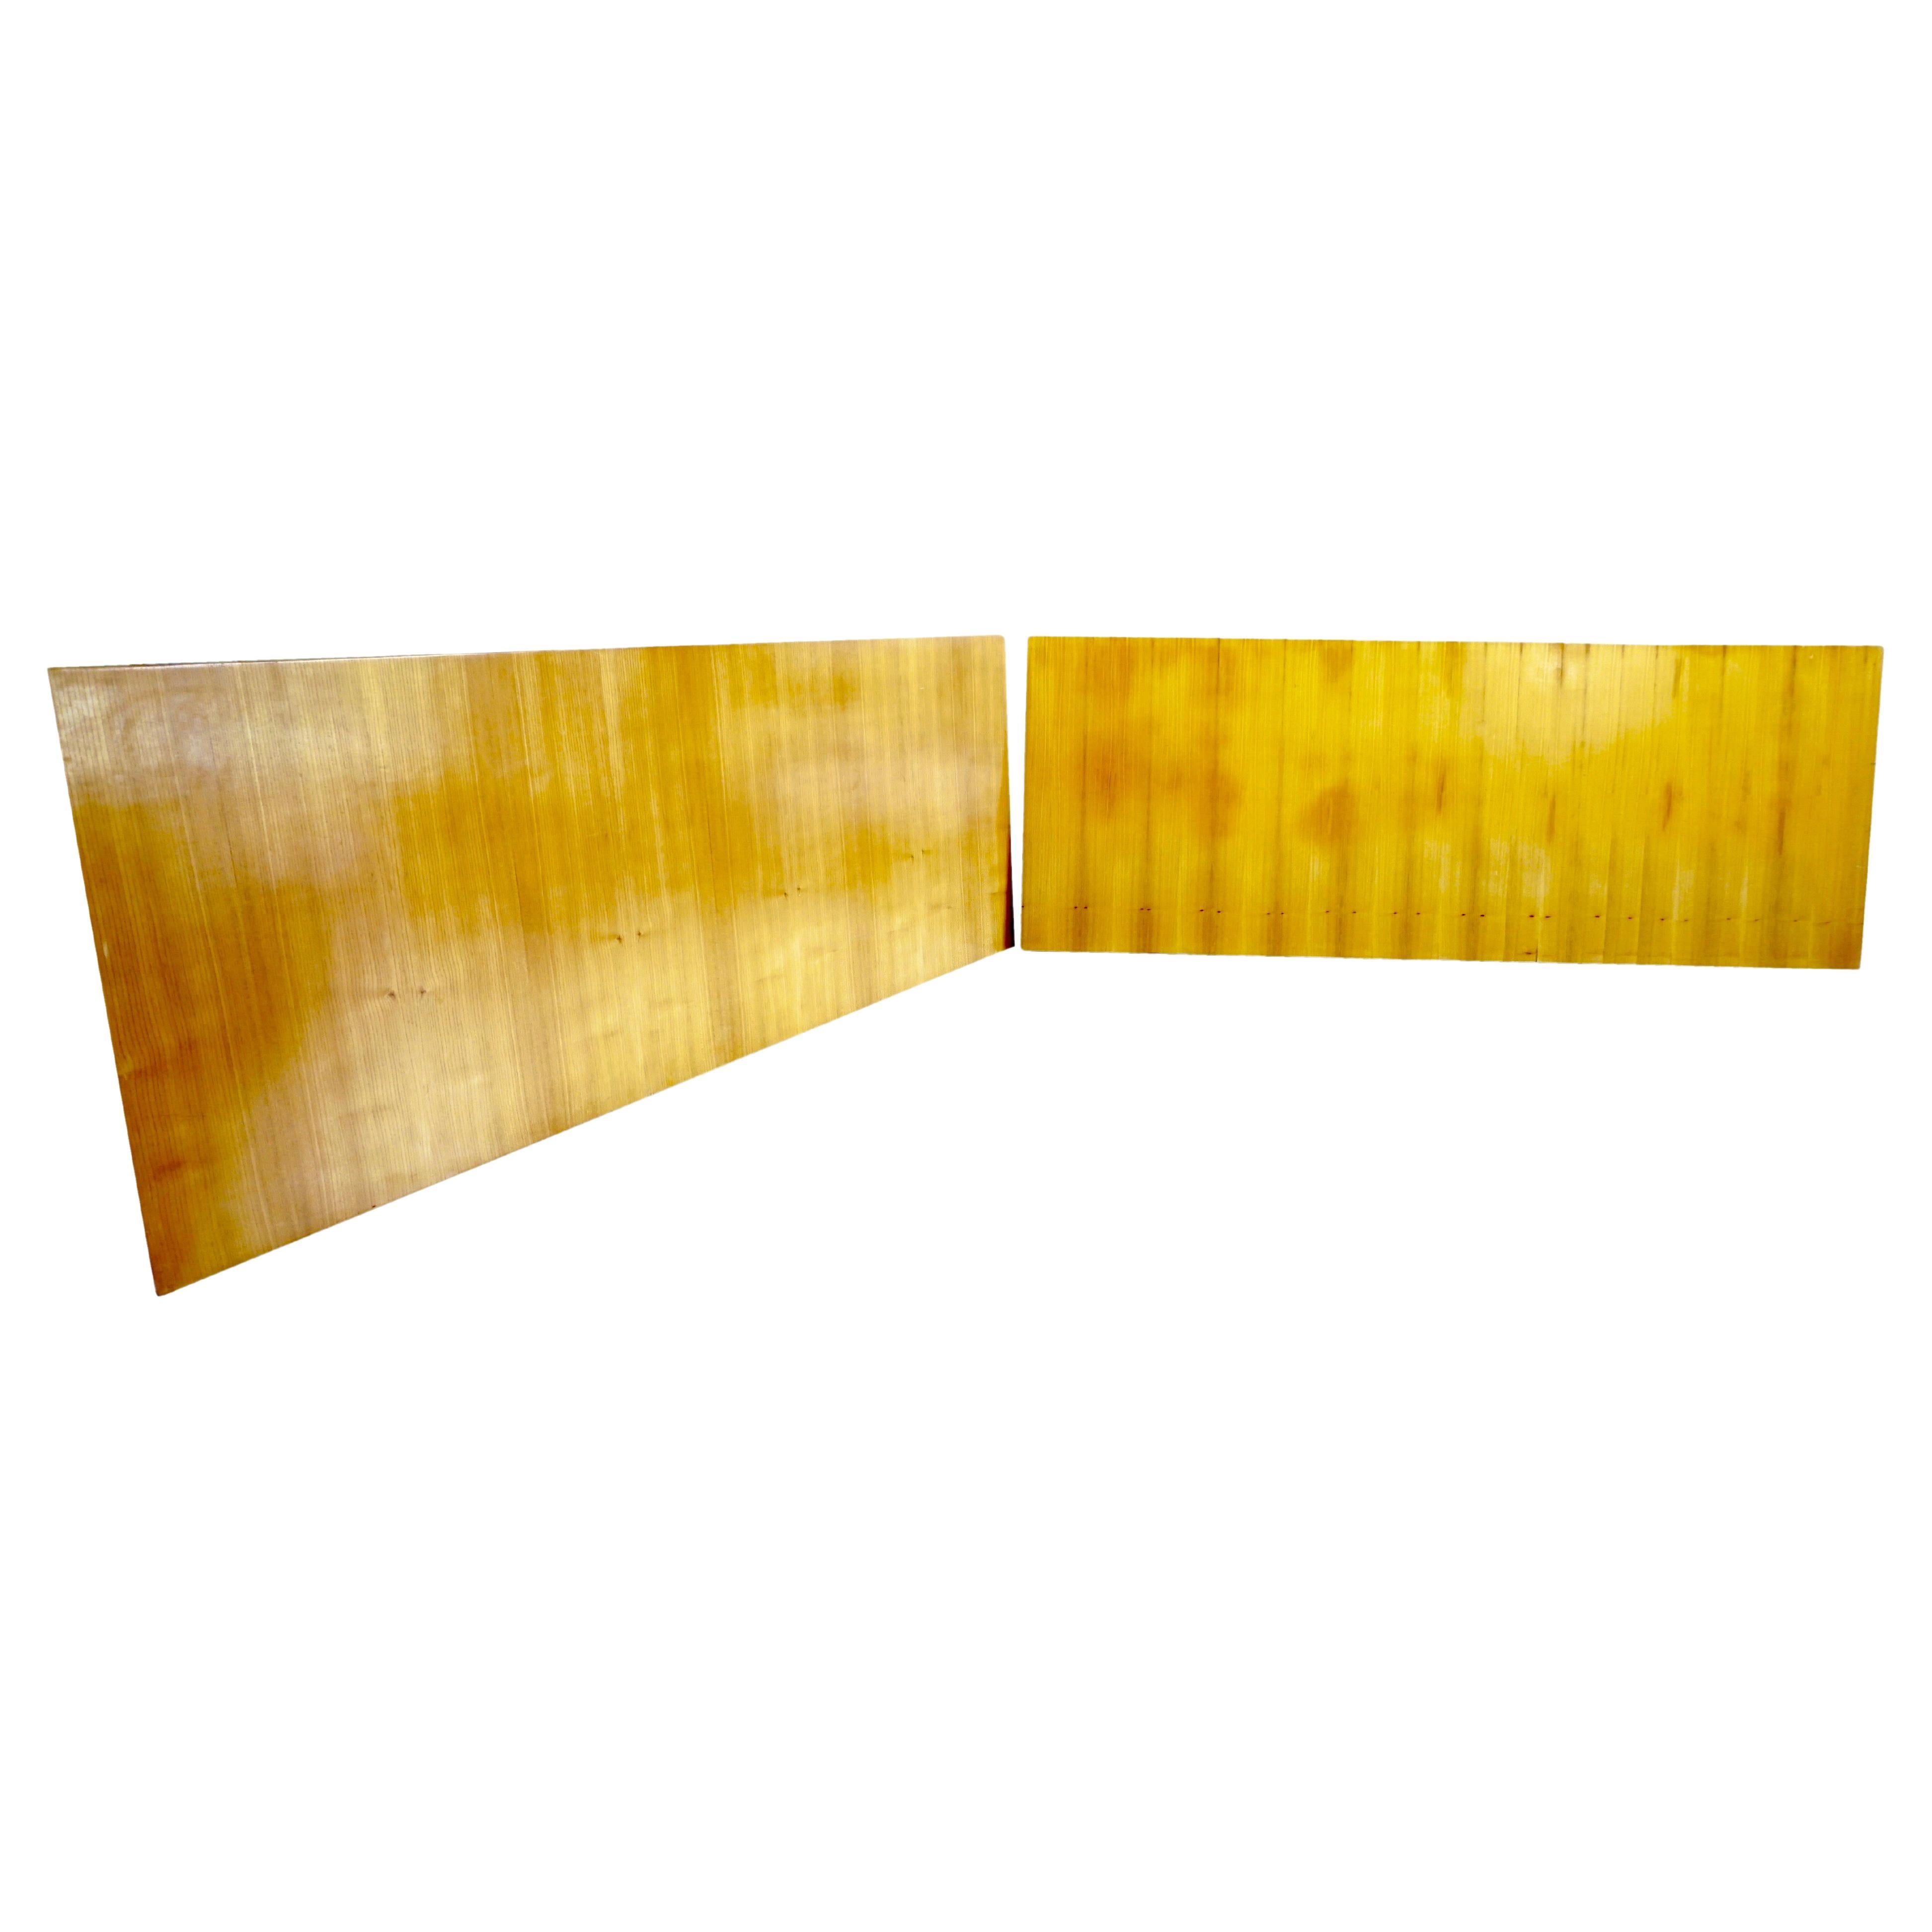 Pair of Large Gio Ponti Cherrywood Boiserie Panels from Hotel Royal, Naples 1955